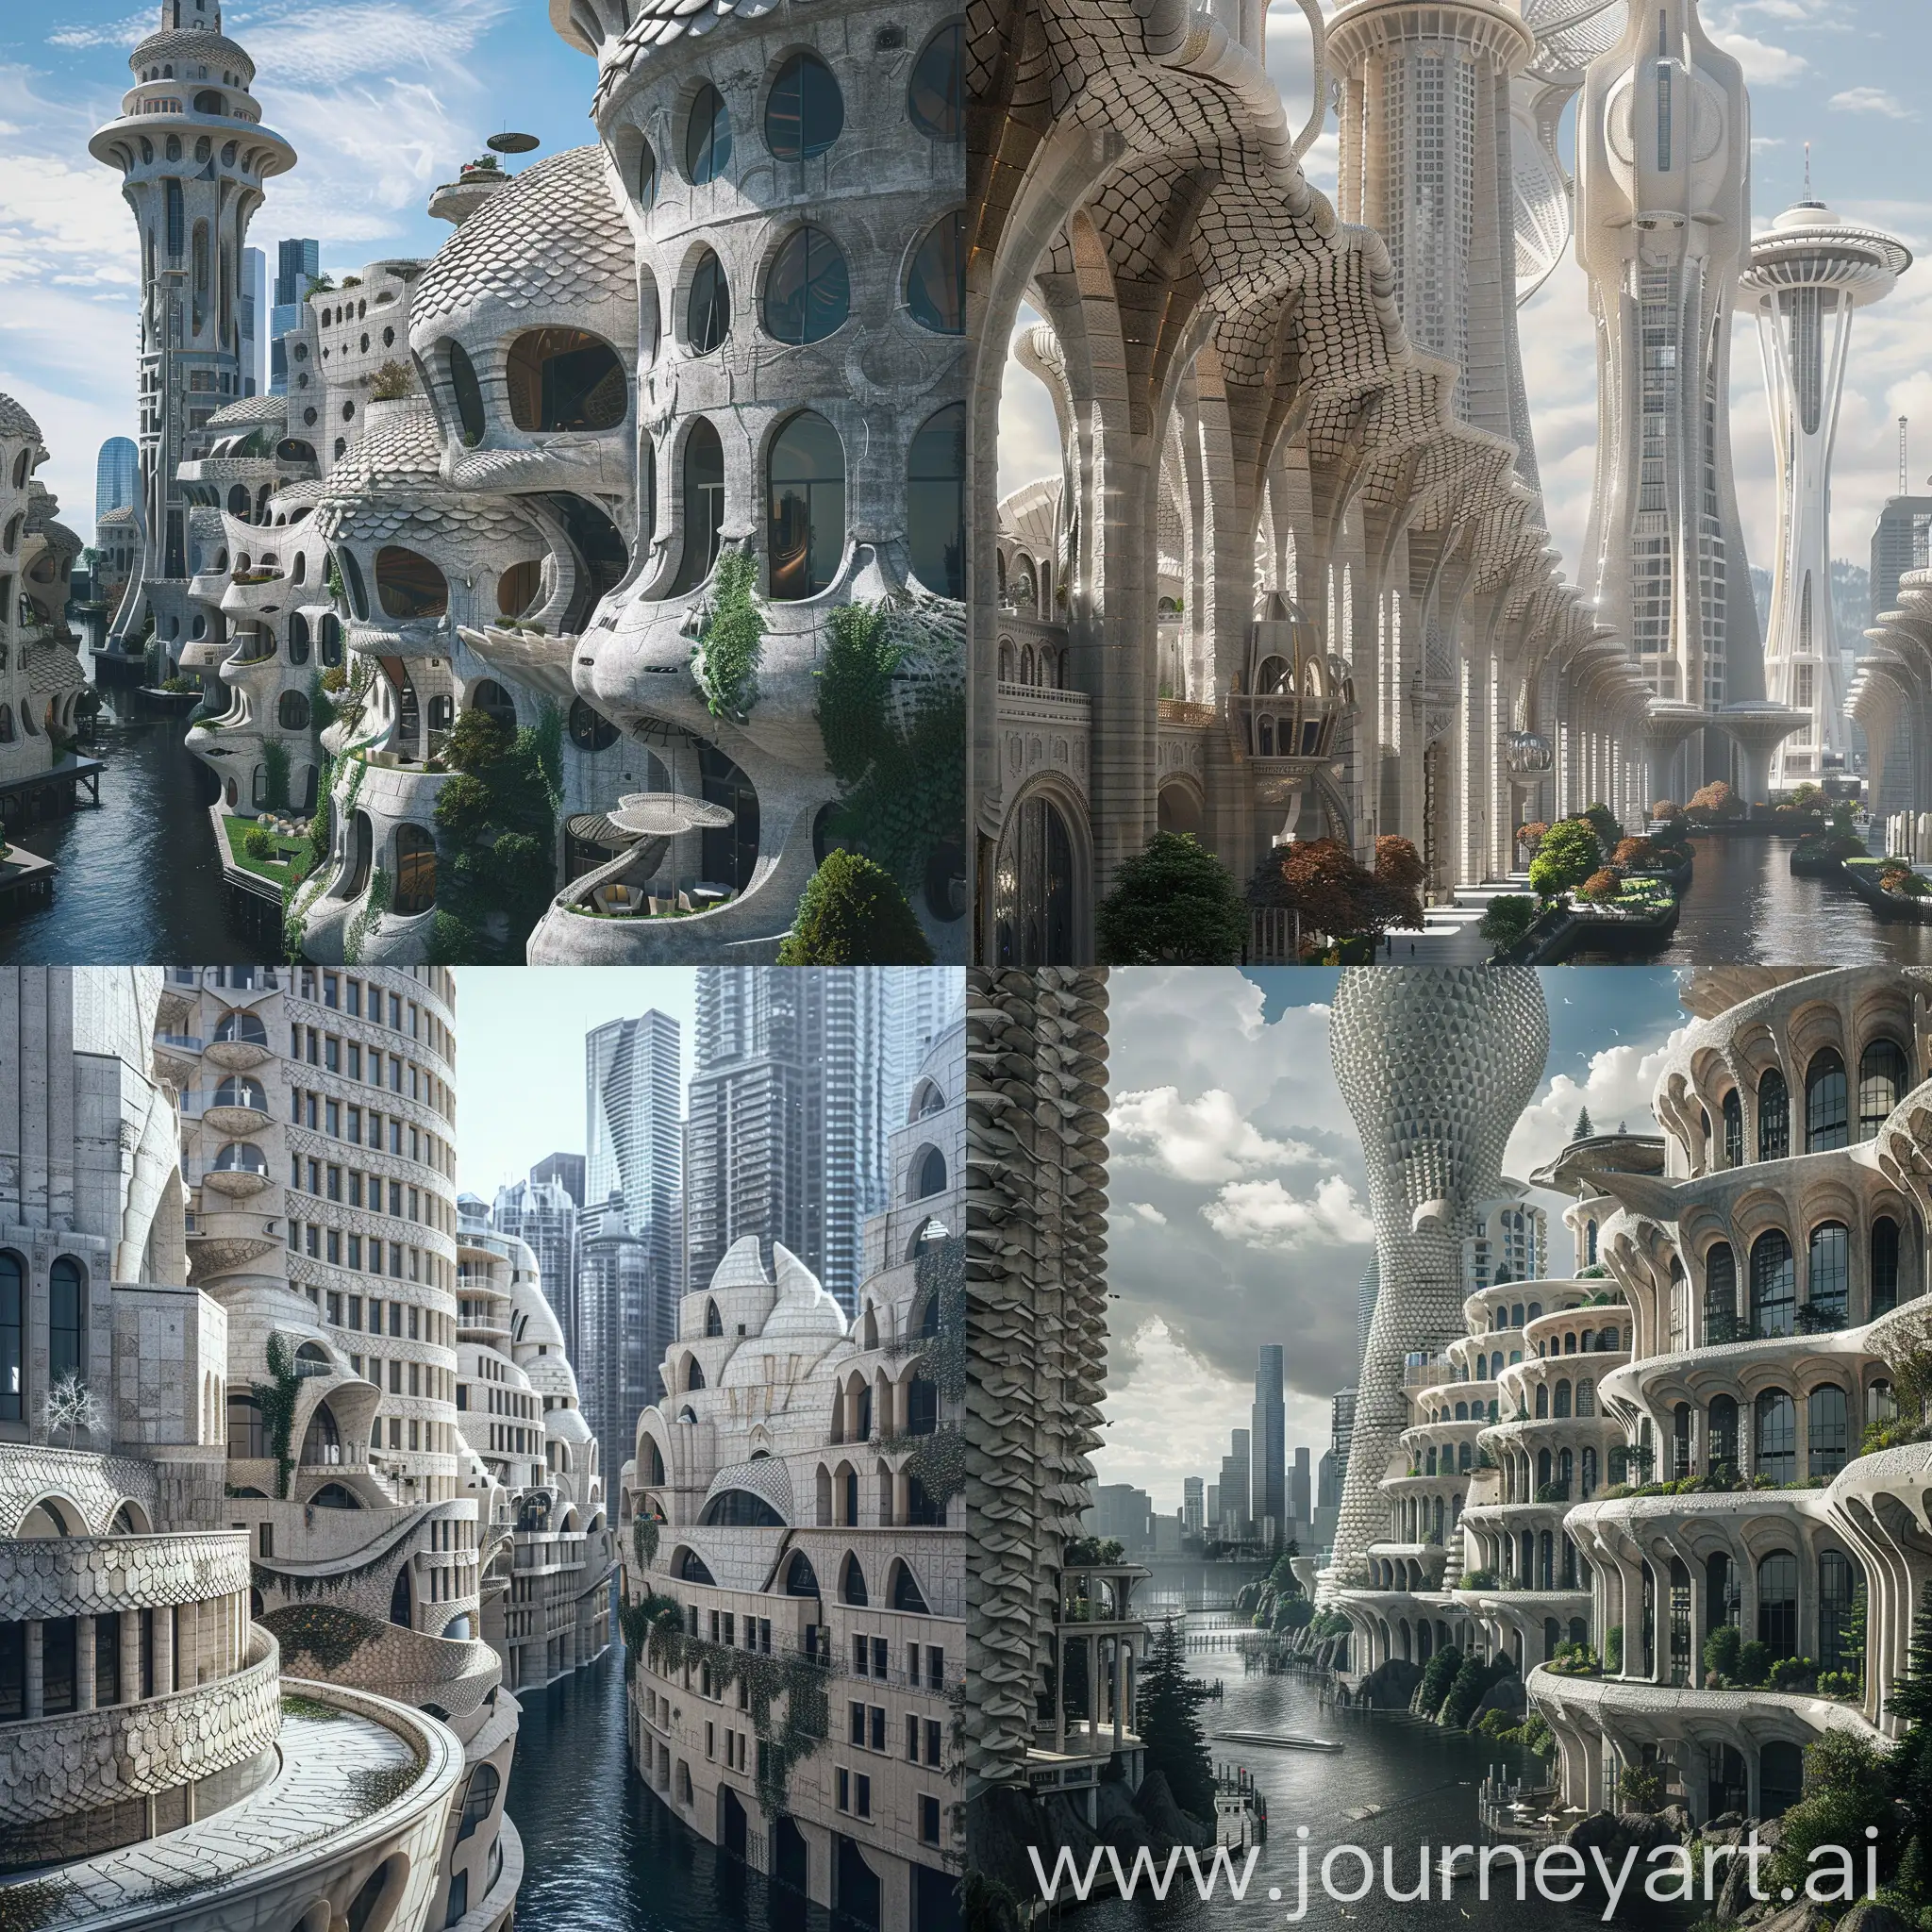 Beautiful futuristic metropolis in an alternate timeline where all buildings retain traditional elements, ornate travertine architecture with scale-like patterns on facades, monumental terraced skyscrapers, canals, Pacific Northwest climate, photograph